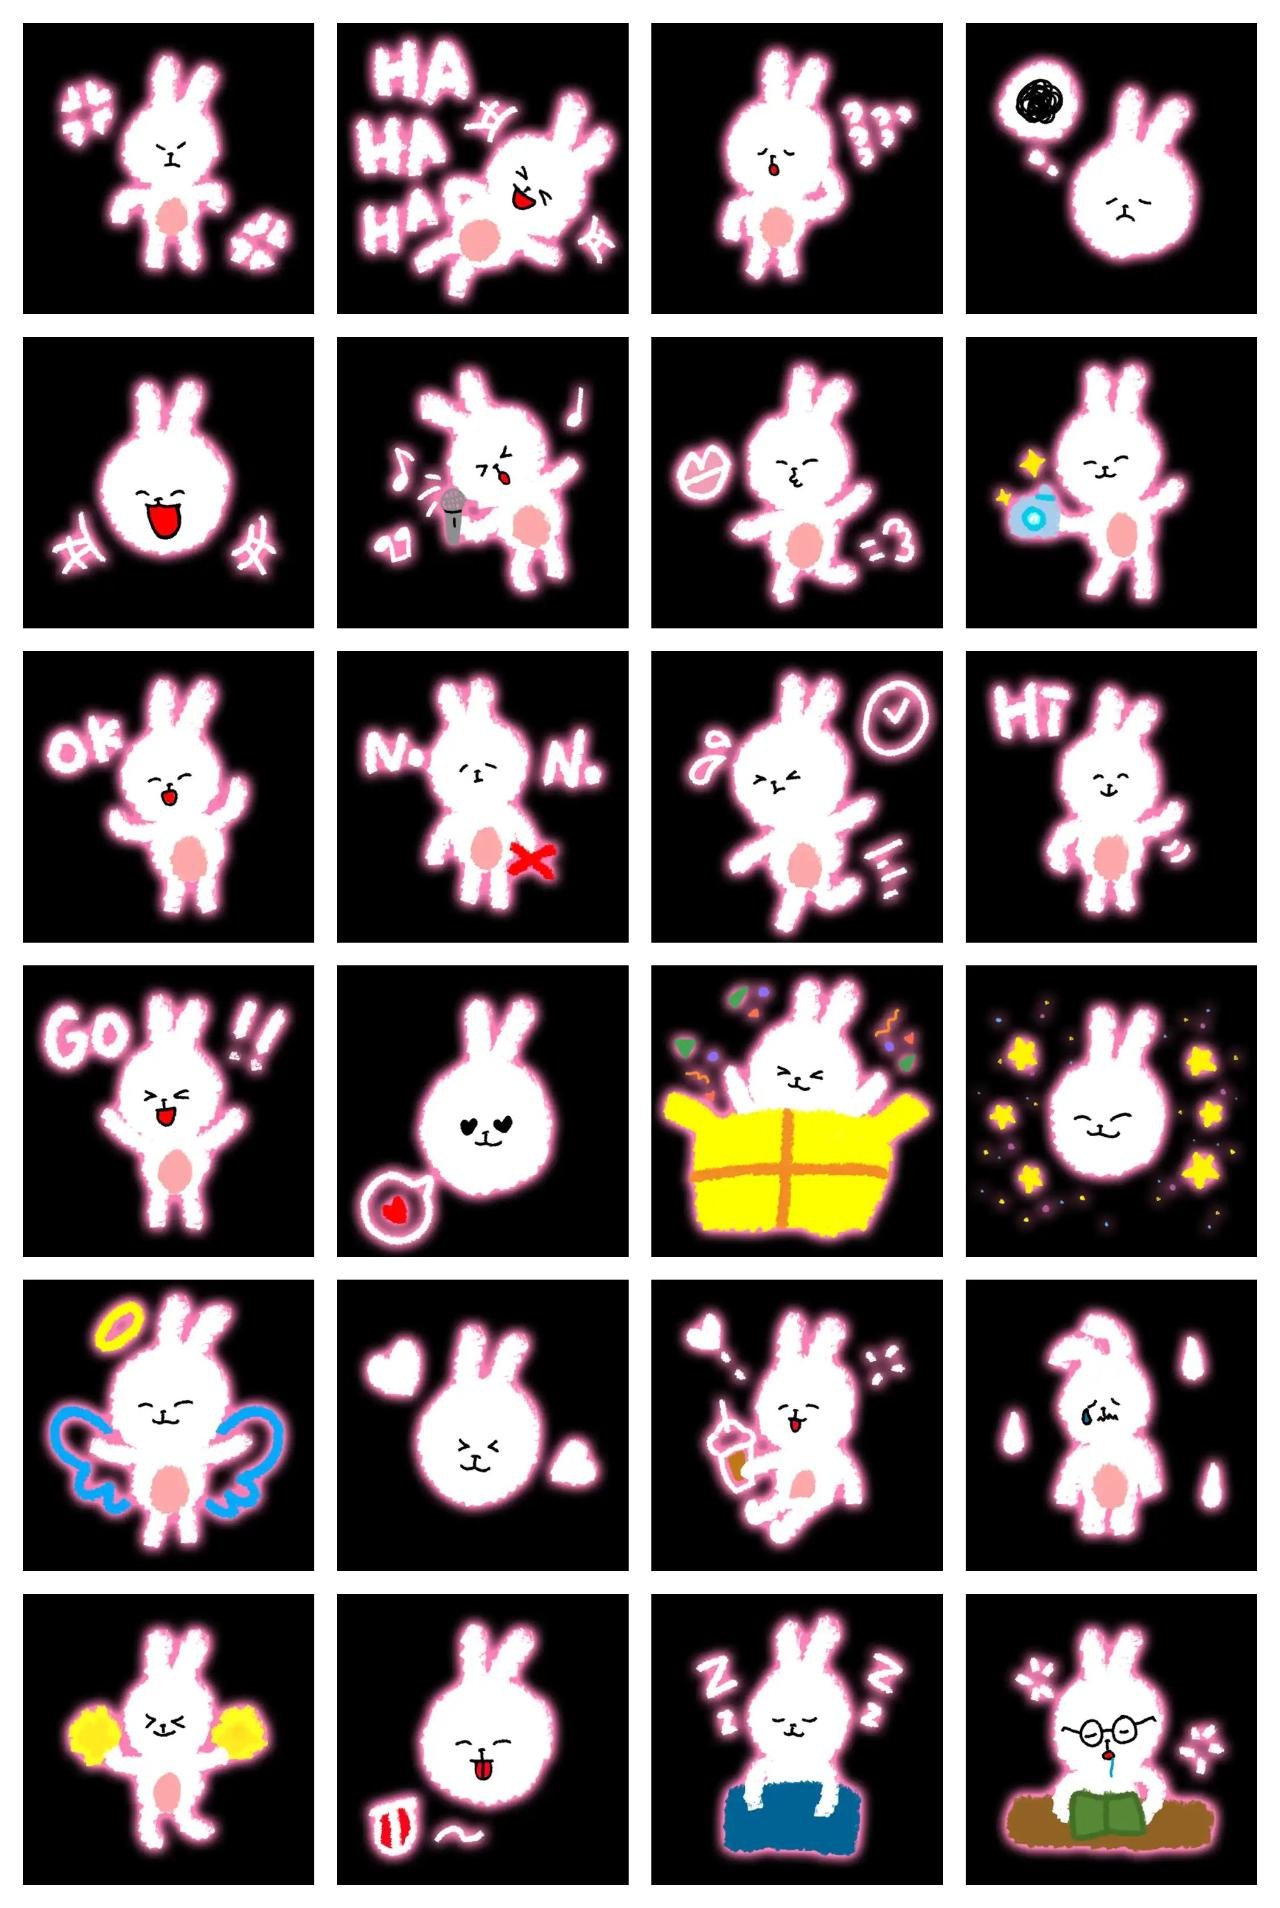 Neon Sign Rabbit Animals sticker pack for Whatsapp, Telegram, Signal, and others chatting and message apps